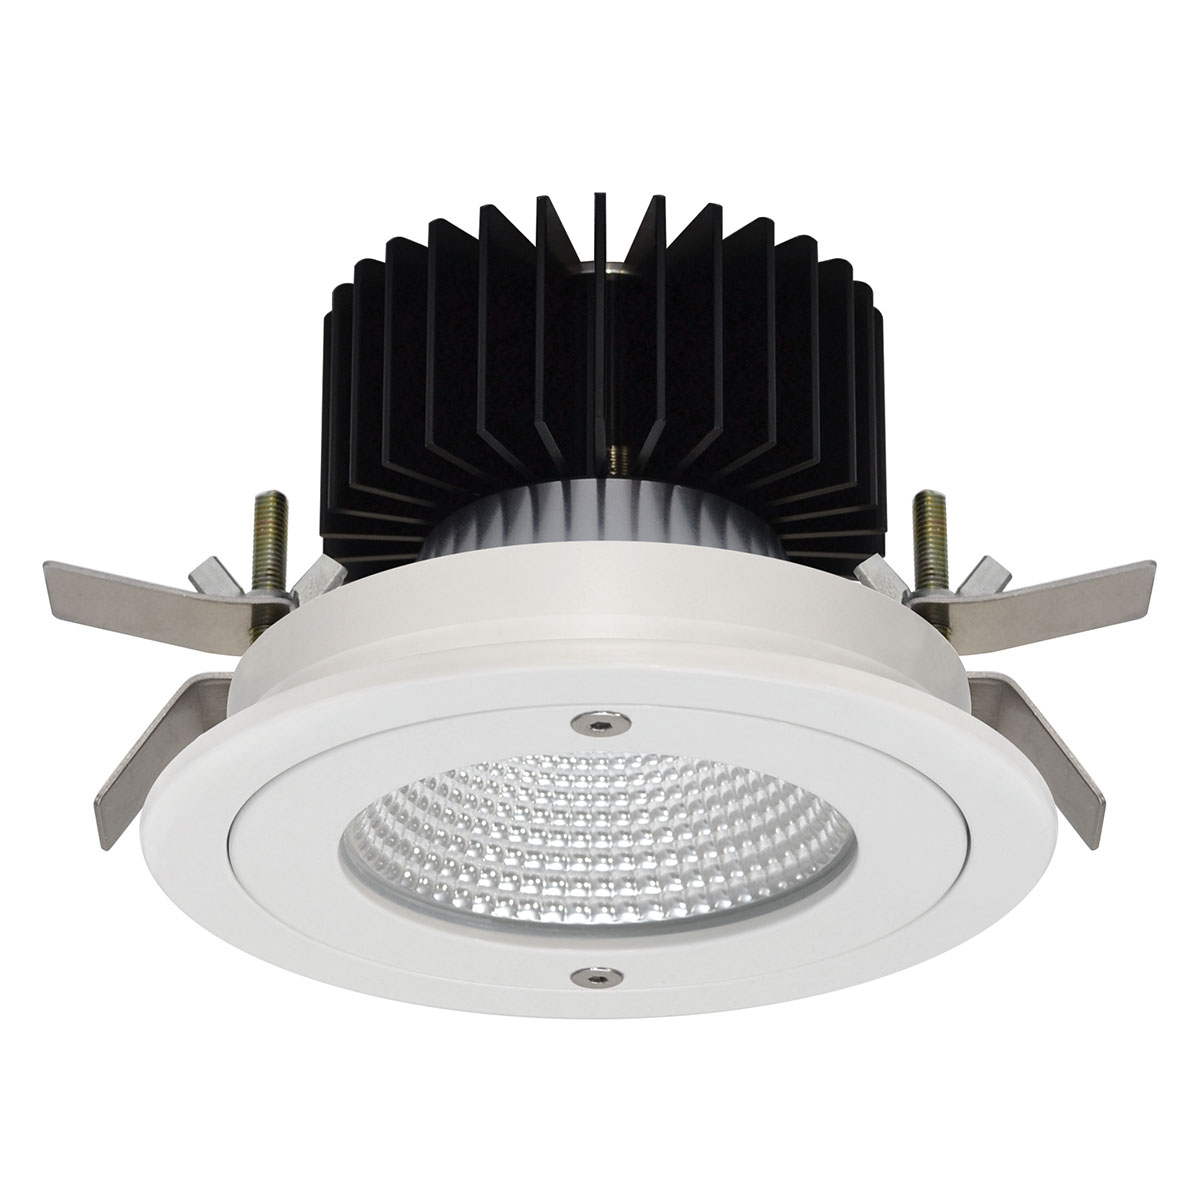 Kopa 10W Anti Tamper Fixed Round Recessed Downlight IP65 Rated 15° Degree Reflector Black